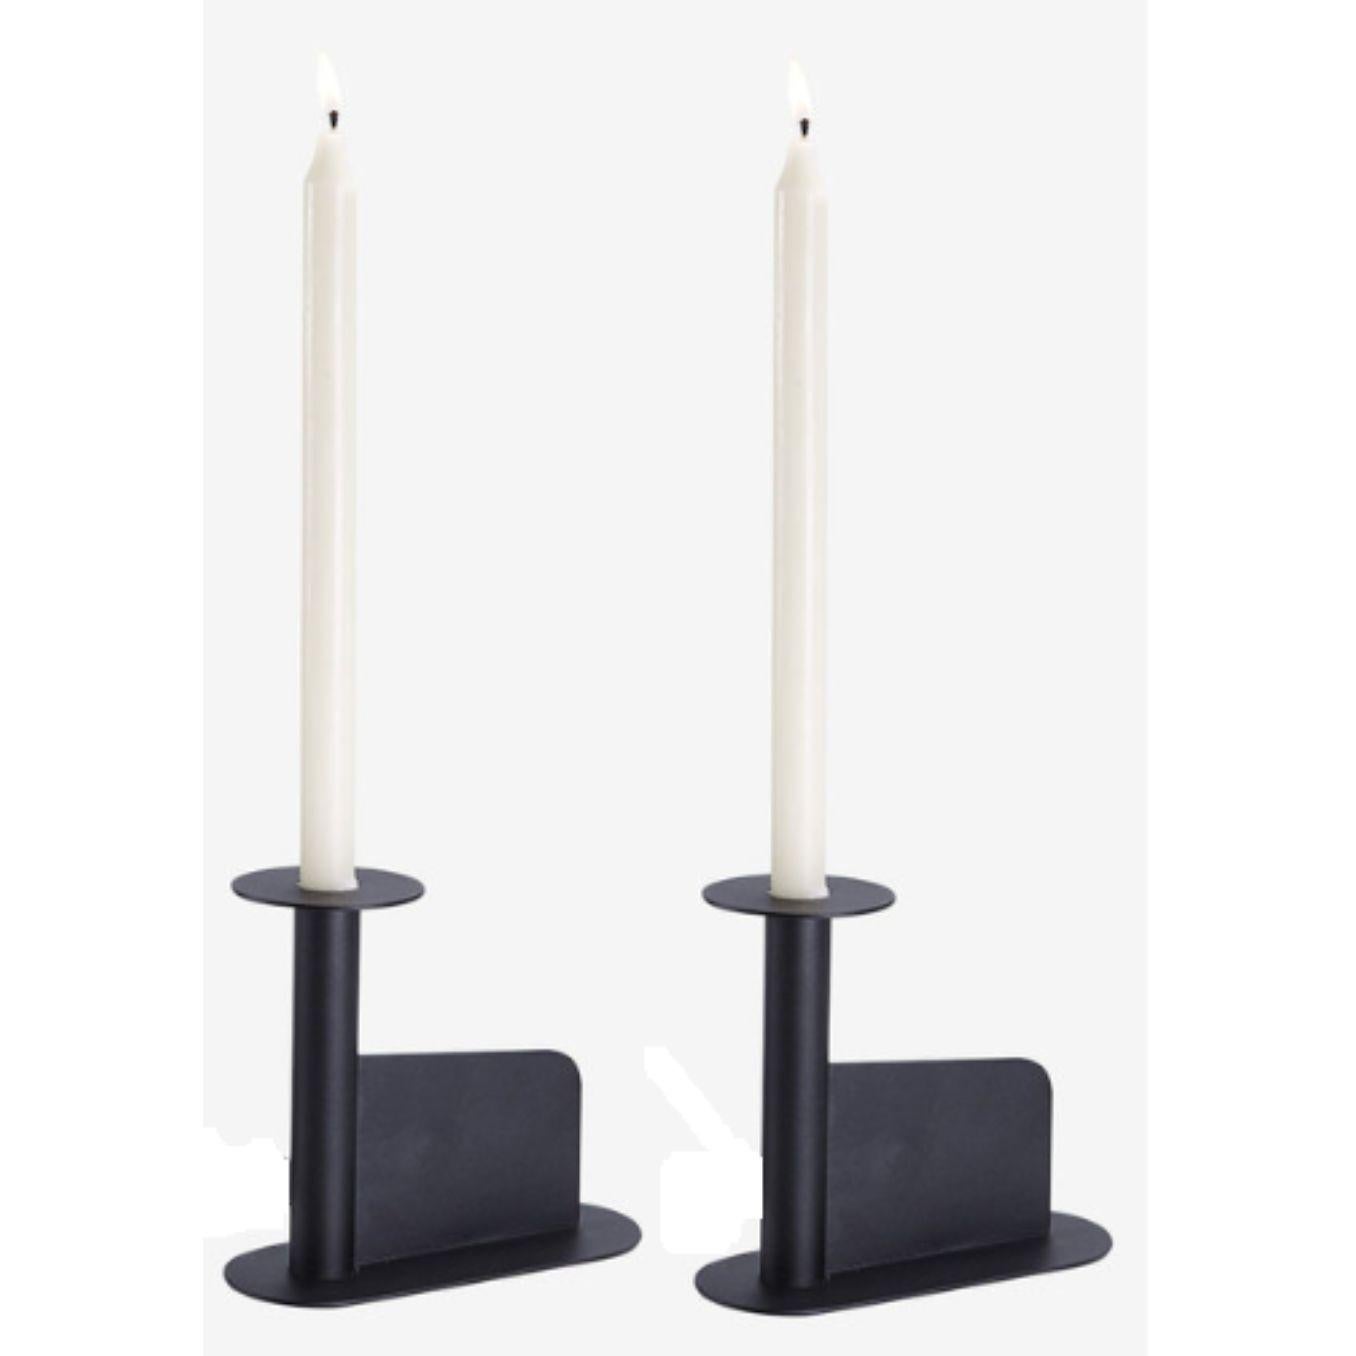 Set of 2 small Safran candle holder by Radar.
Design: Bastien Taillard.
Materials: Metal.
Dimensions: D 18 x W 7 x H 16 cm.

Elegant, timeless, understated. The RADAR collection allows you to take a welcome break from the teeming world of